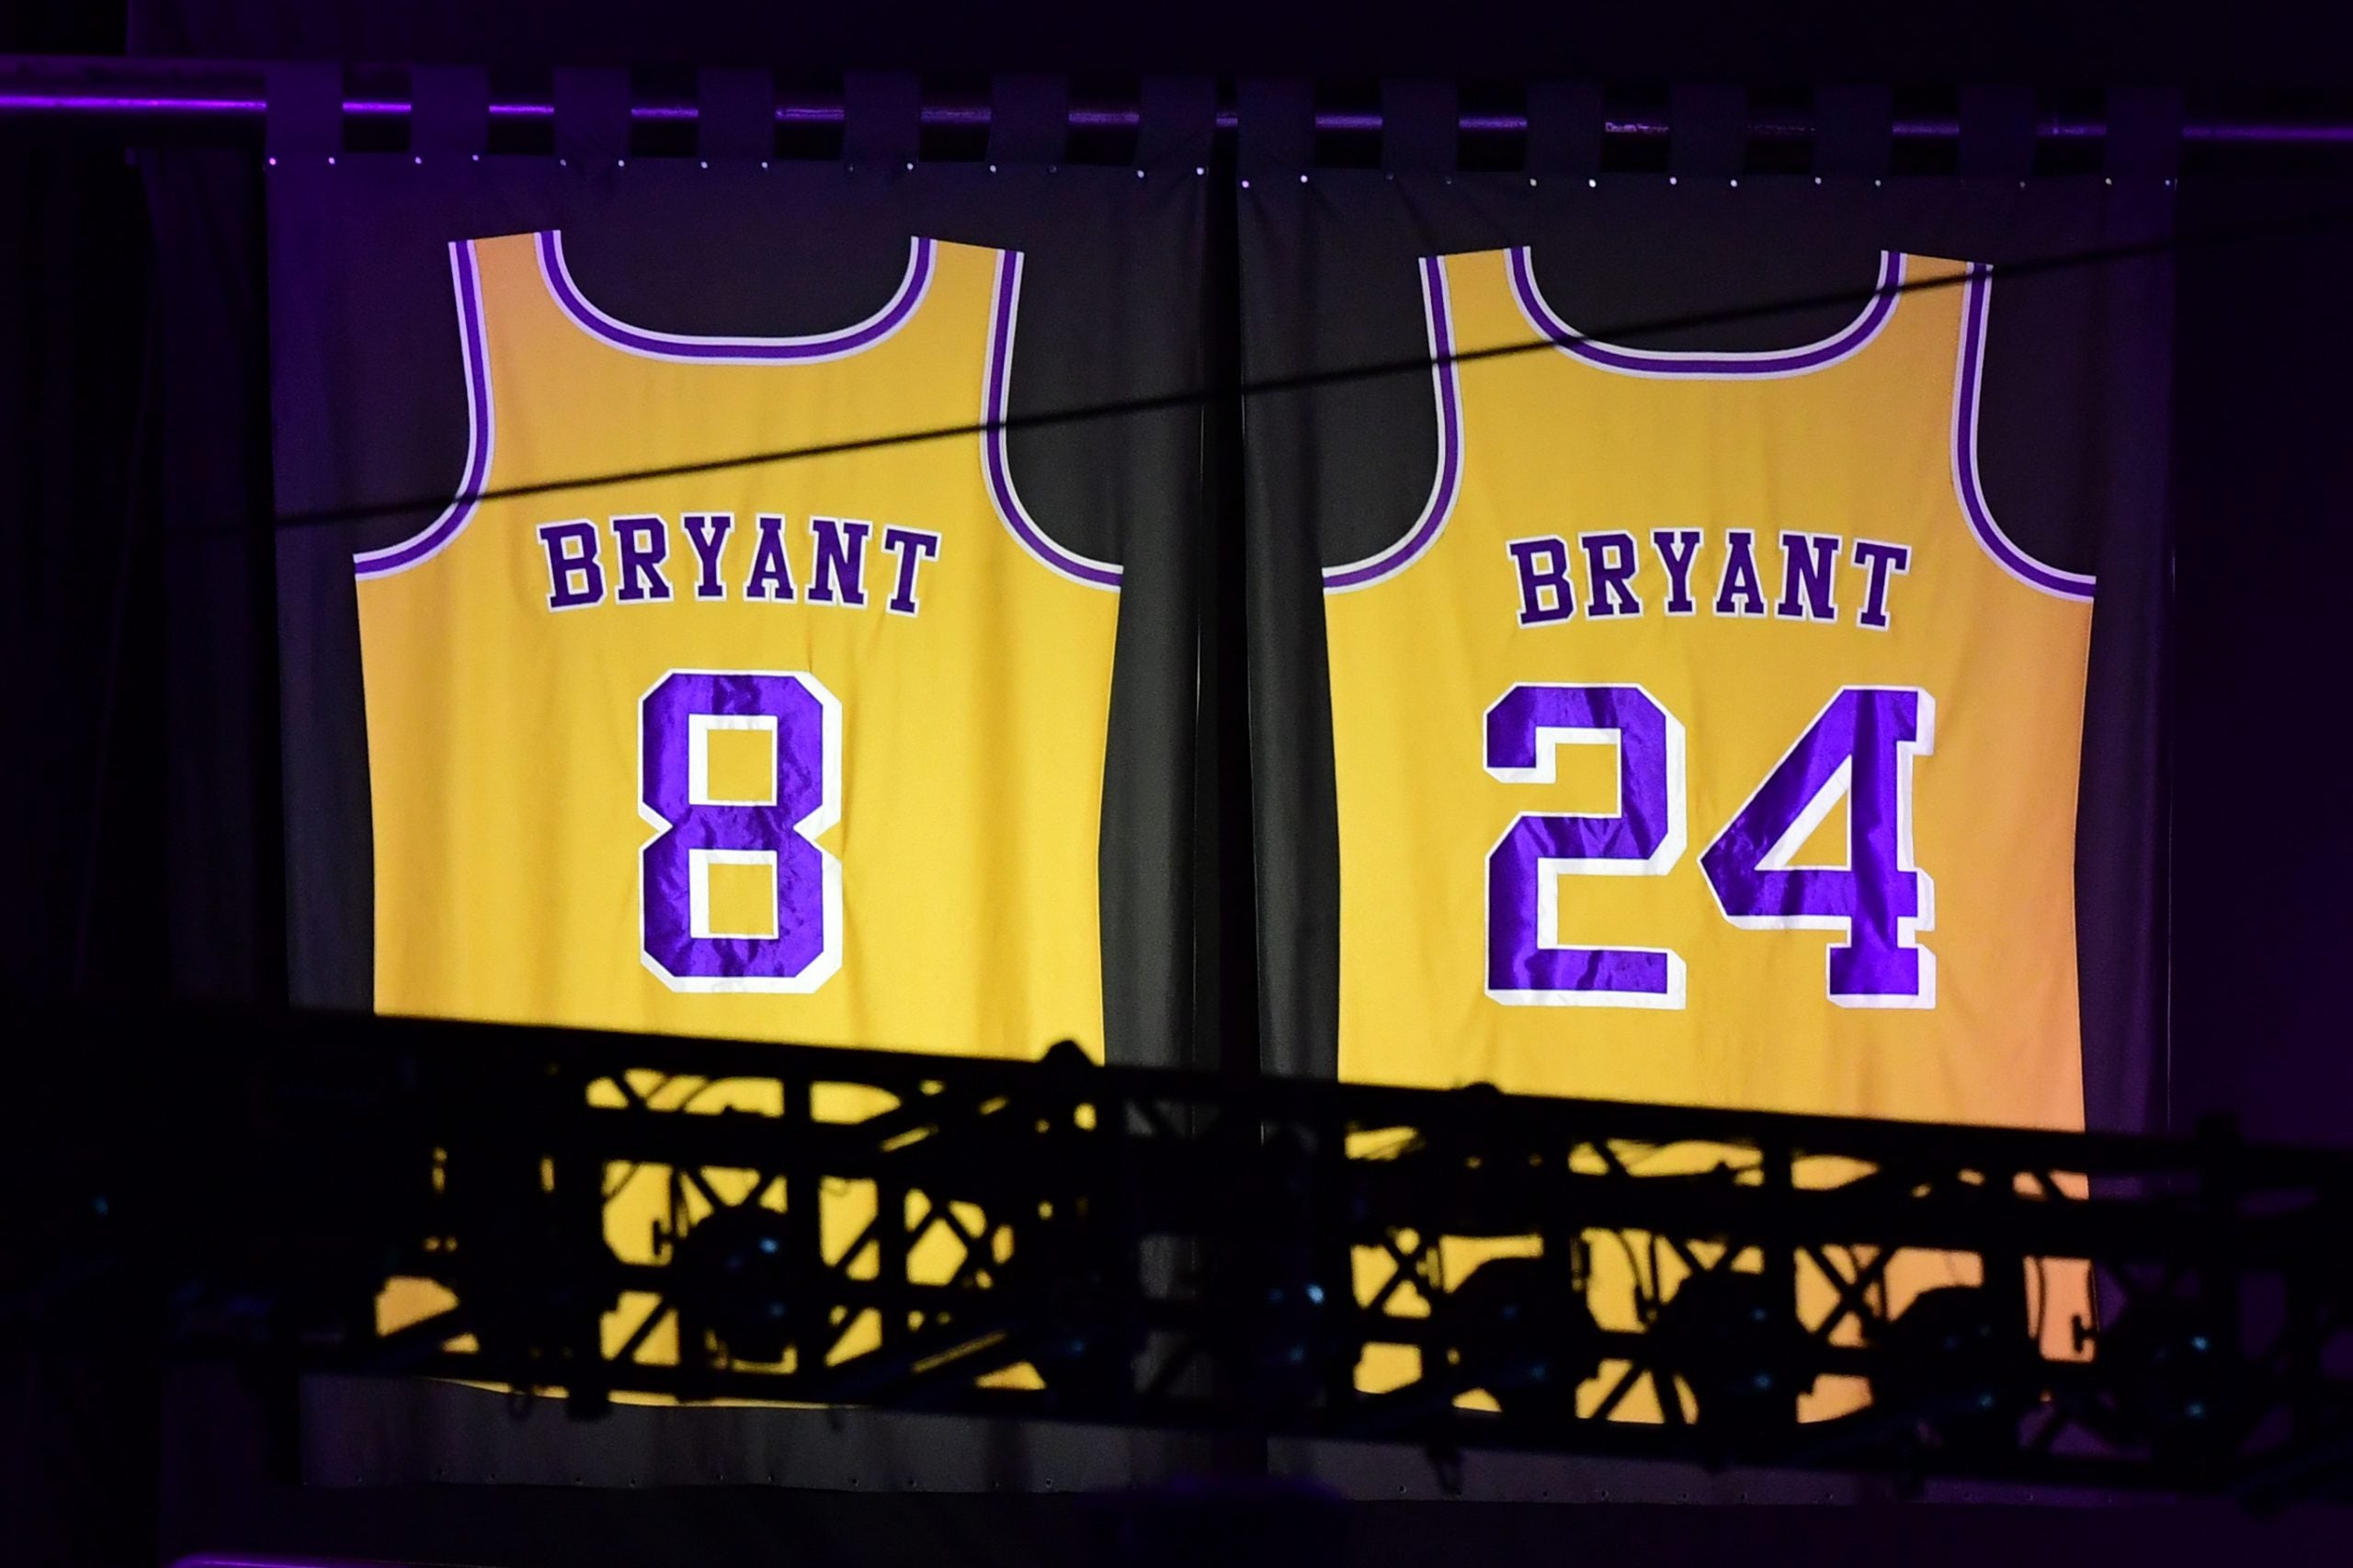 Every Touching Photo From Kobe And Gianna Bryant's Public Memorial